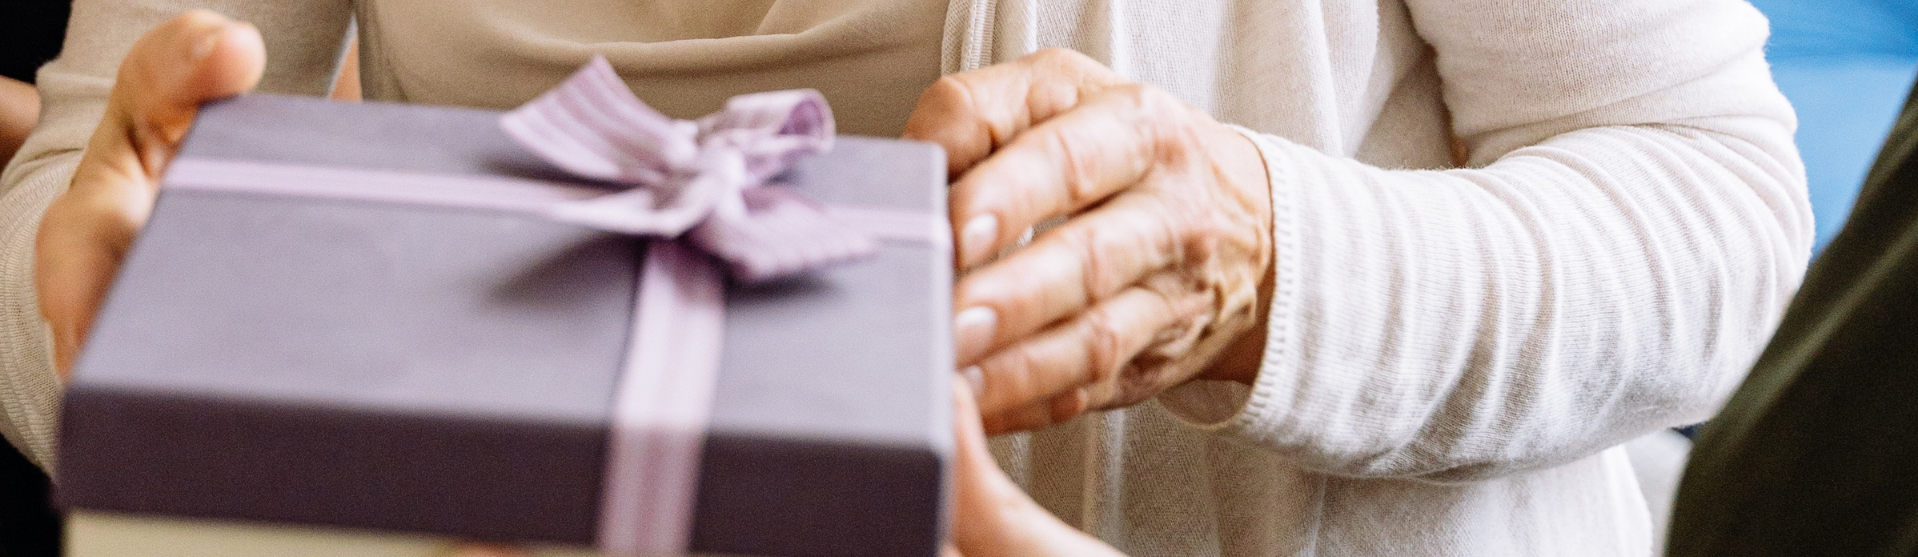 Hand holding a purple gift box